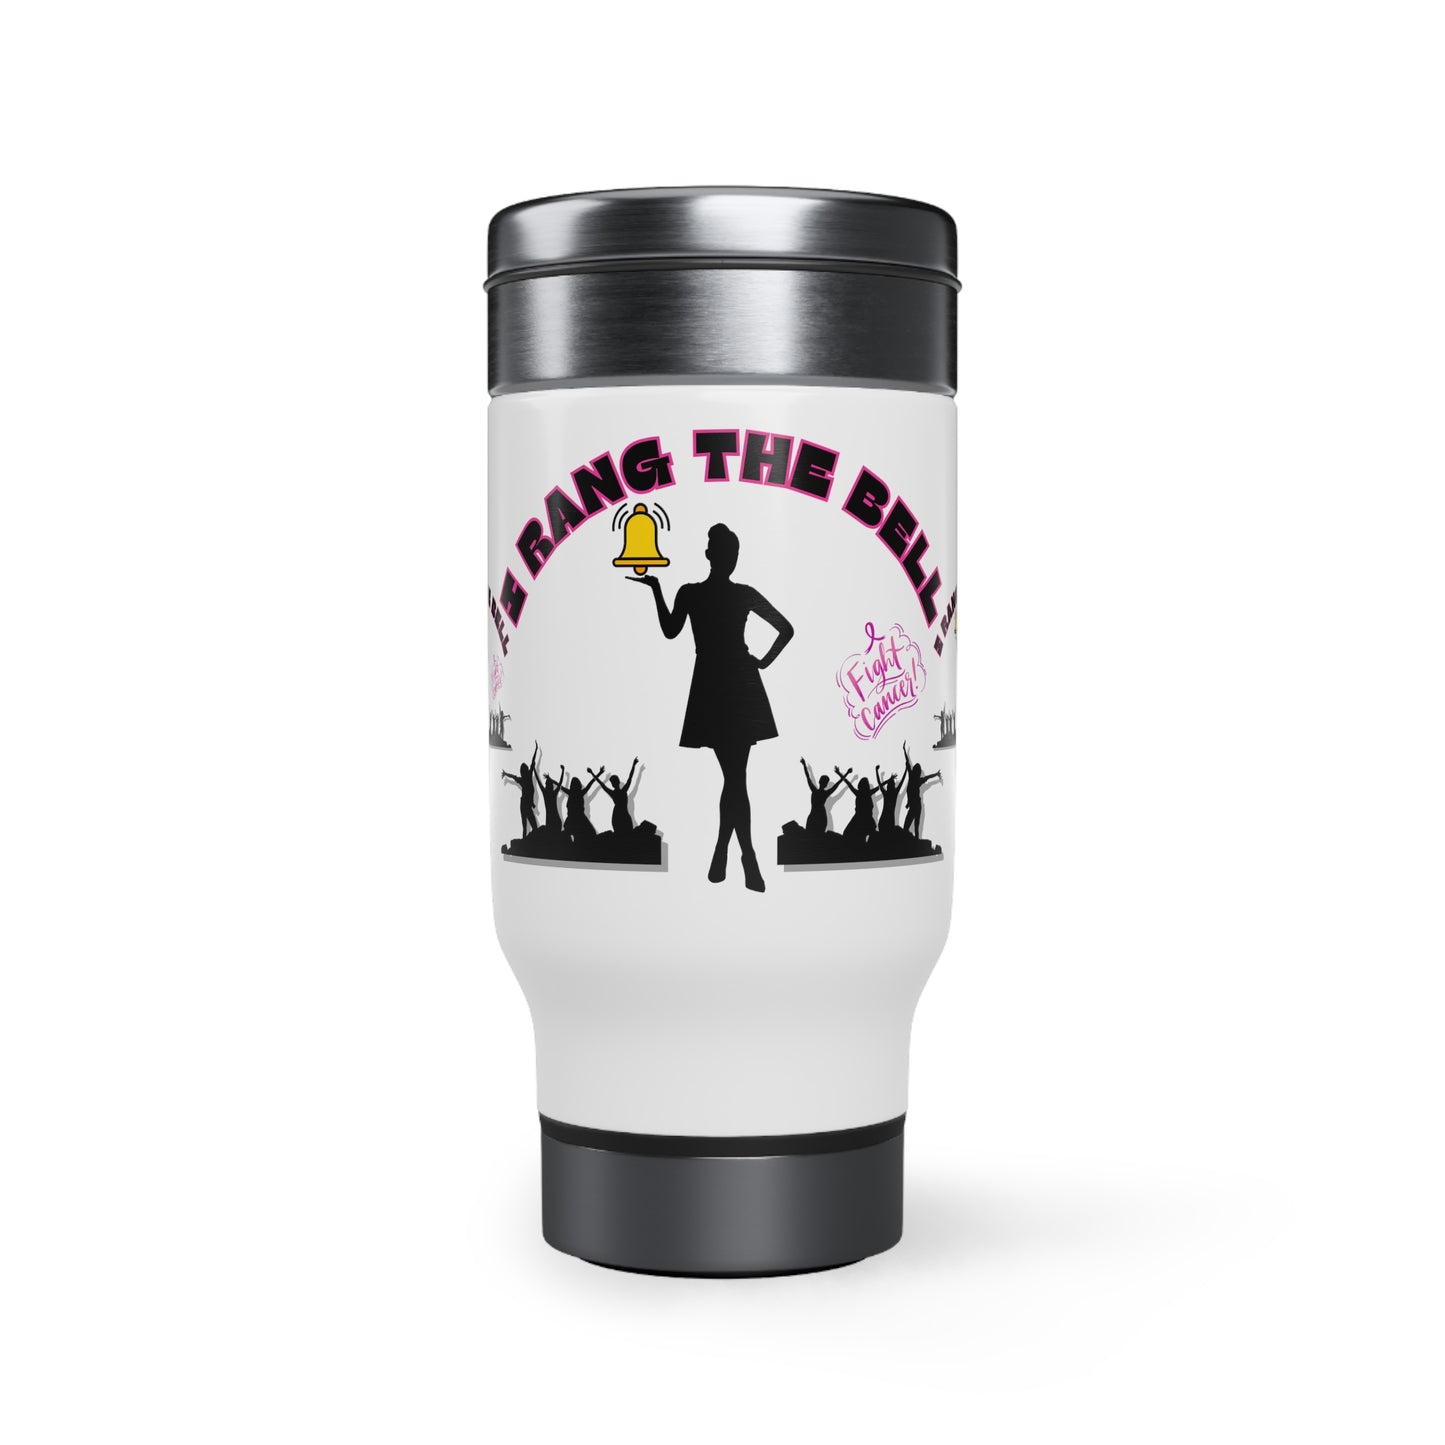 I Rang the Bell Stainless Steel Travel Mug with Handle, 14oz